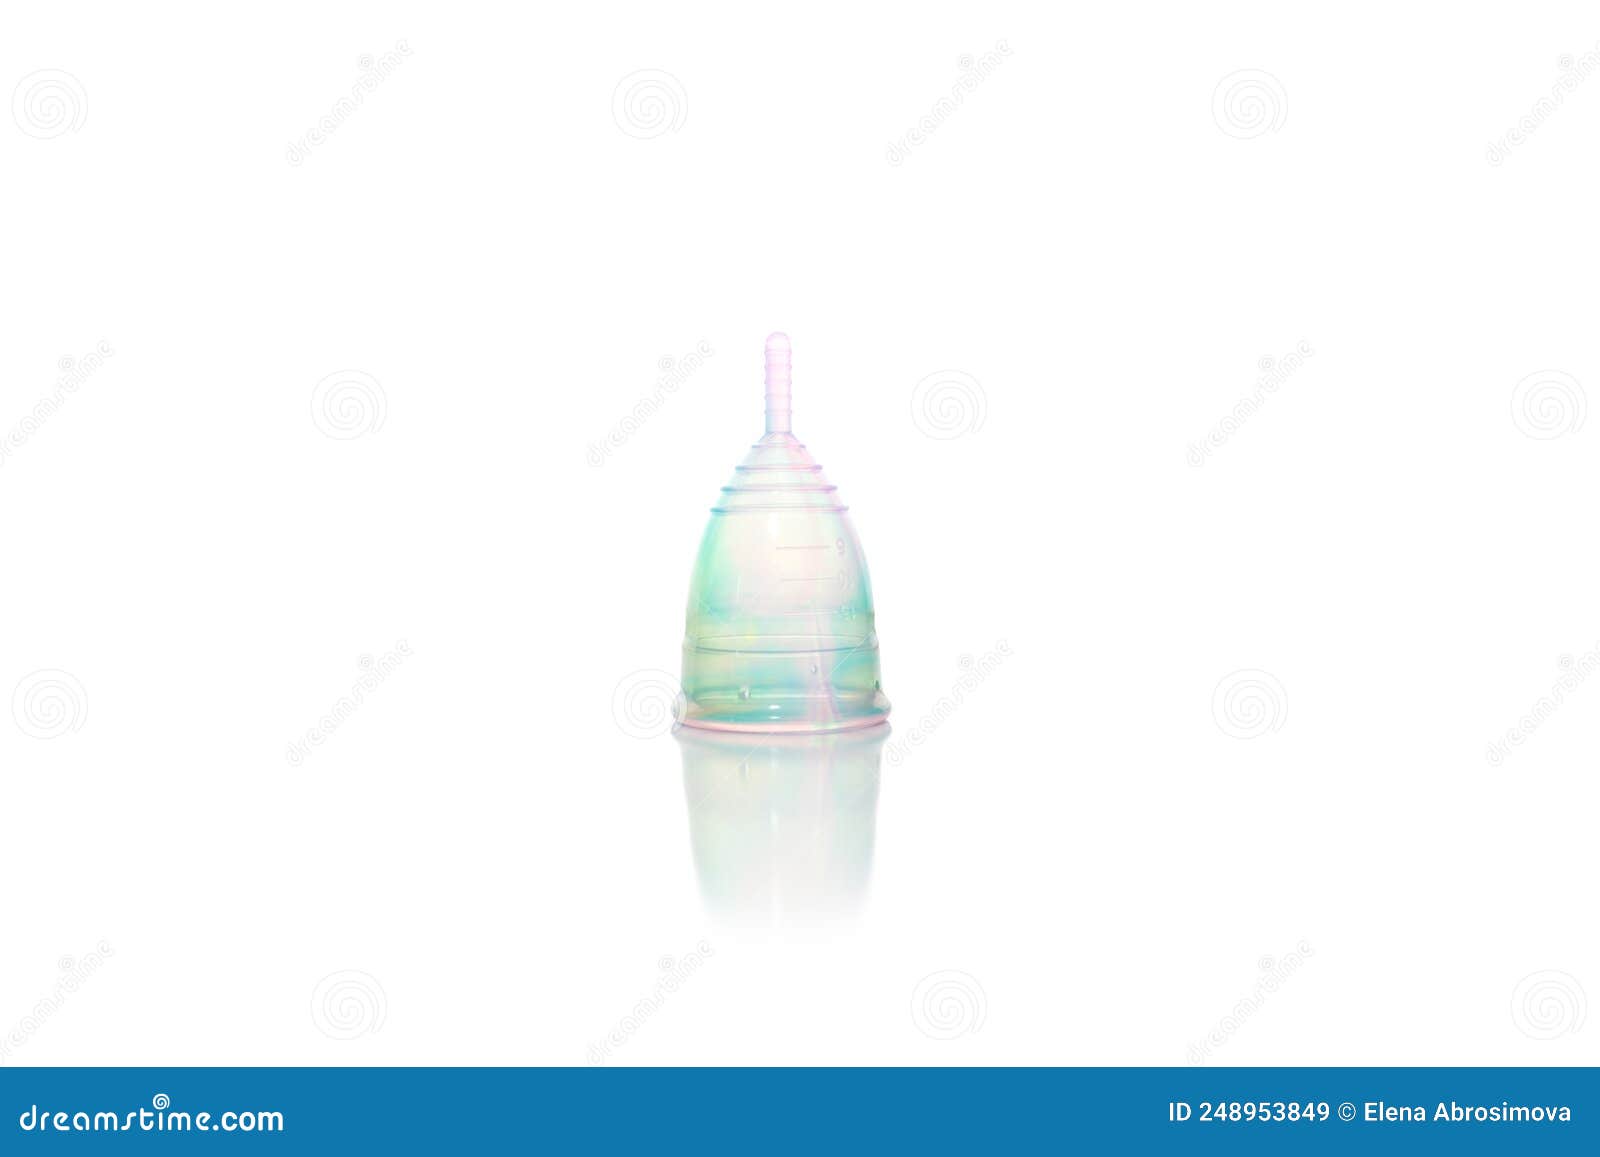 menstrual collector, rainbow colors, women hygienic period cup